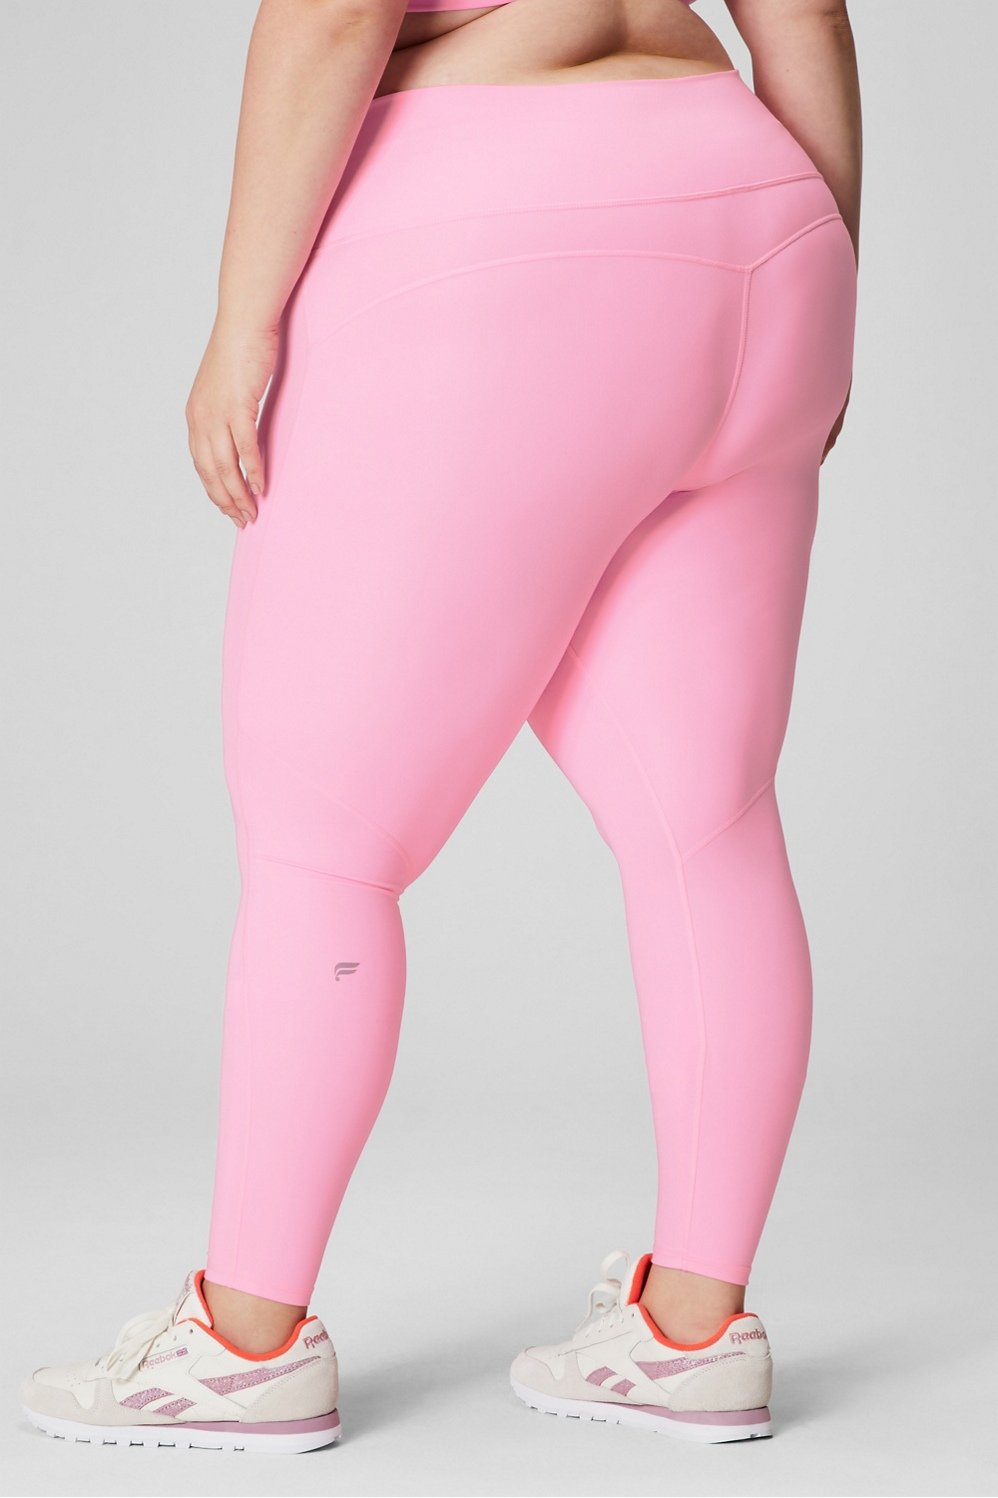 RQYYD Clearance Women's Plus Size Yoga Leggings High Waist Fake Two-Piece  Drawstring Yoga Pants Quick-Drying Yoga Trousers with Pockets(Pink,3XL)